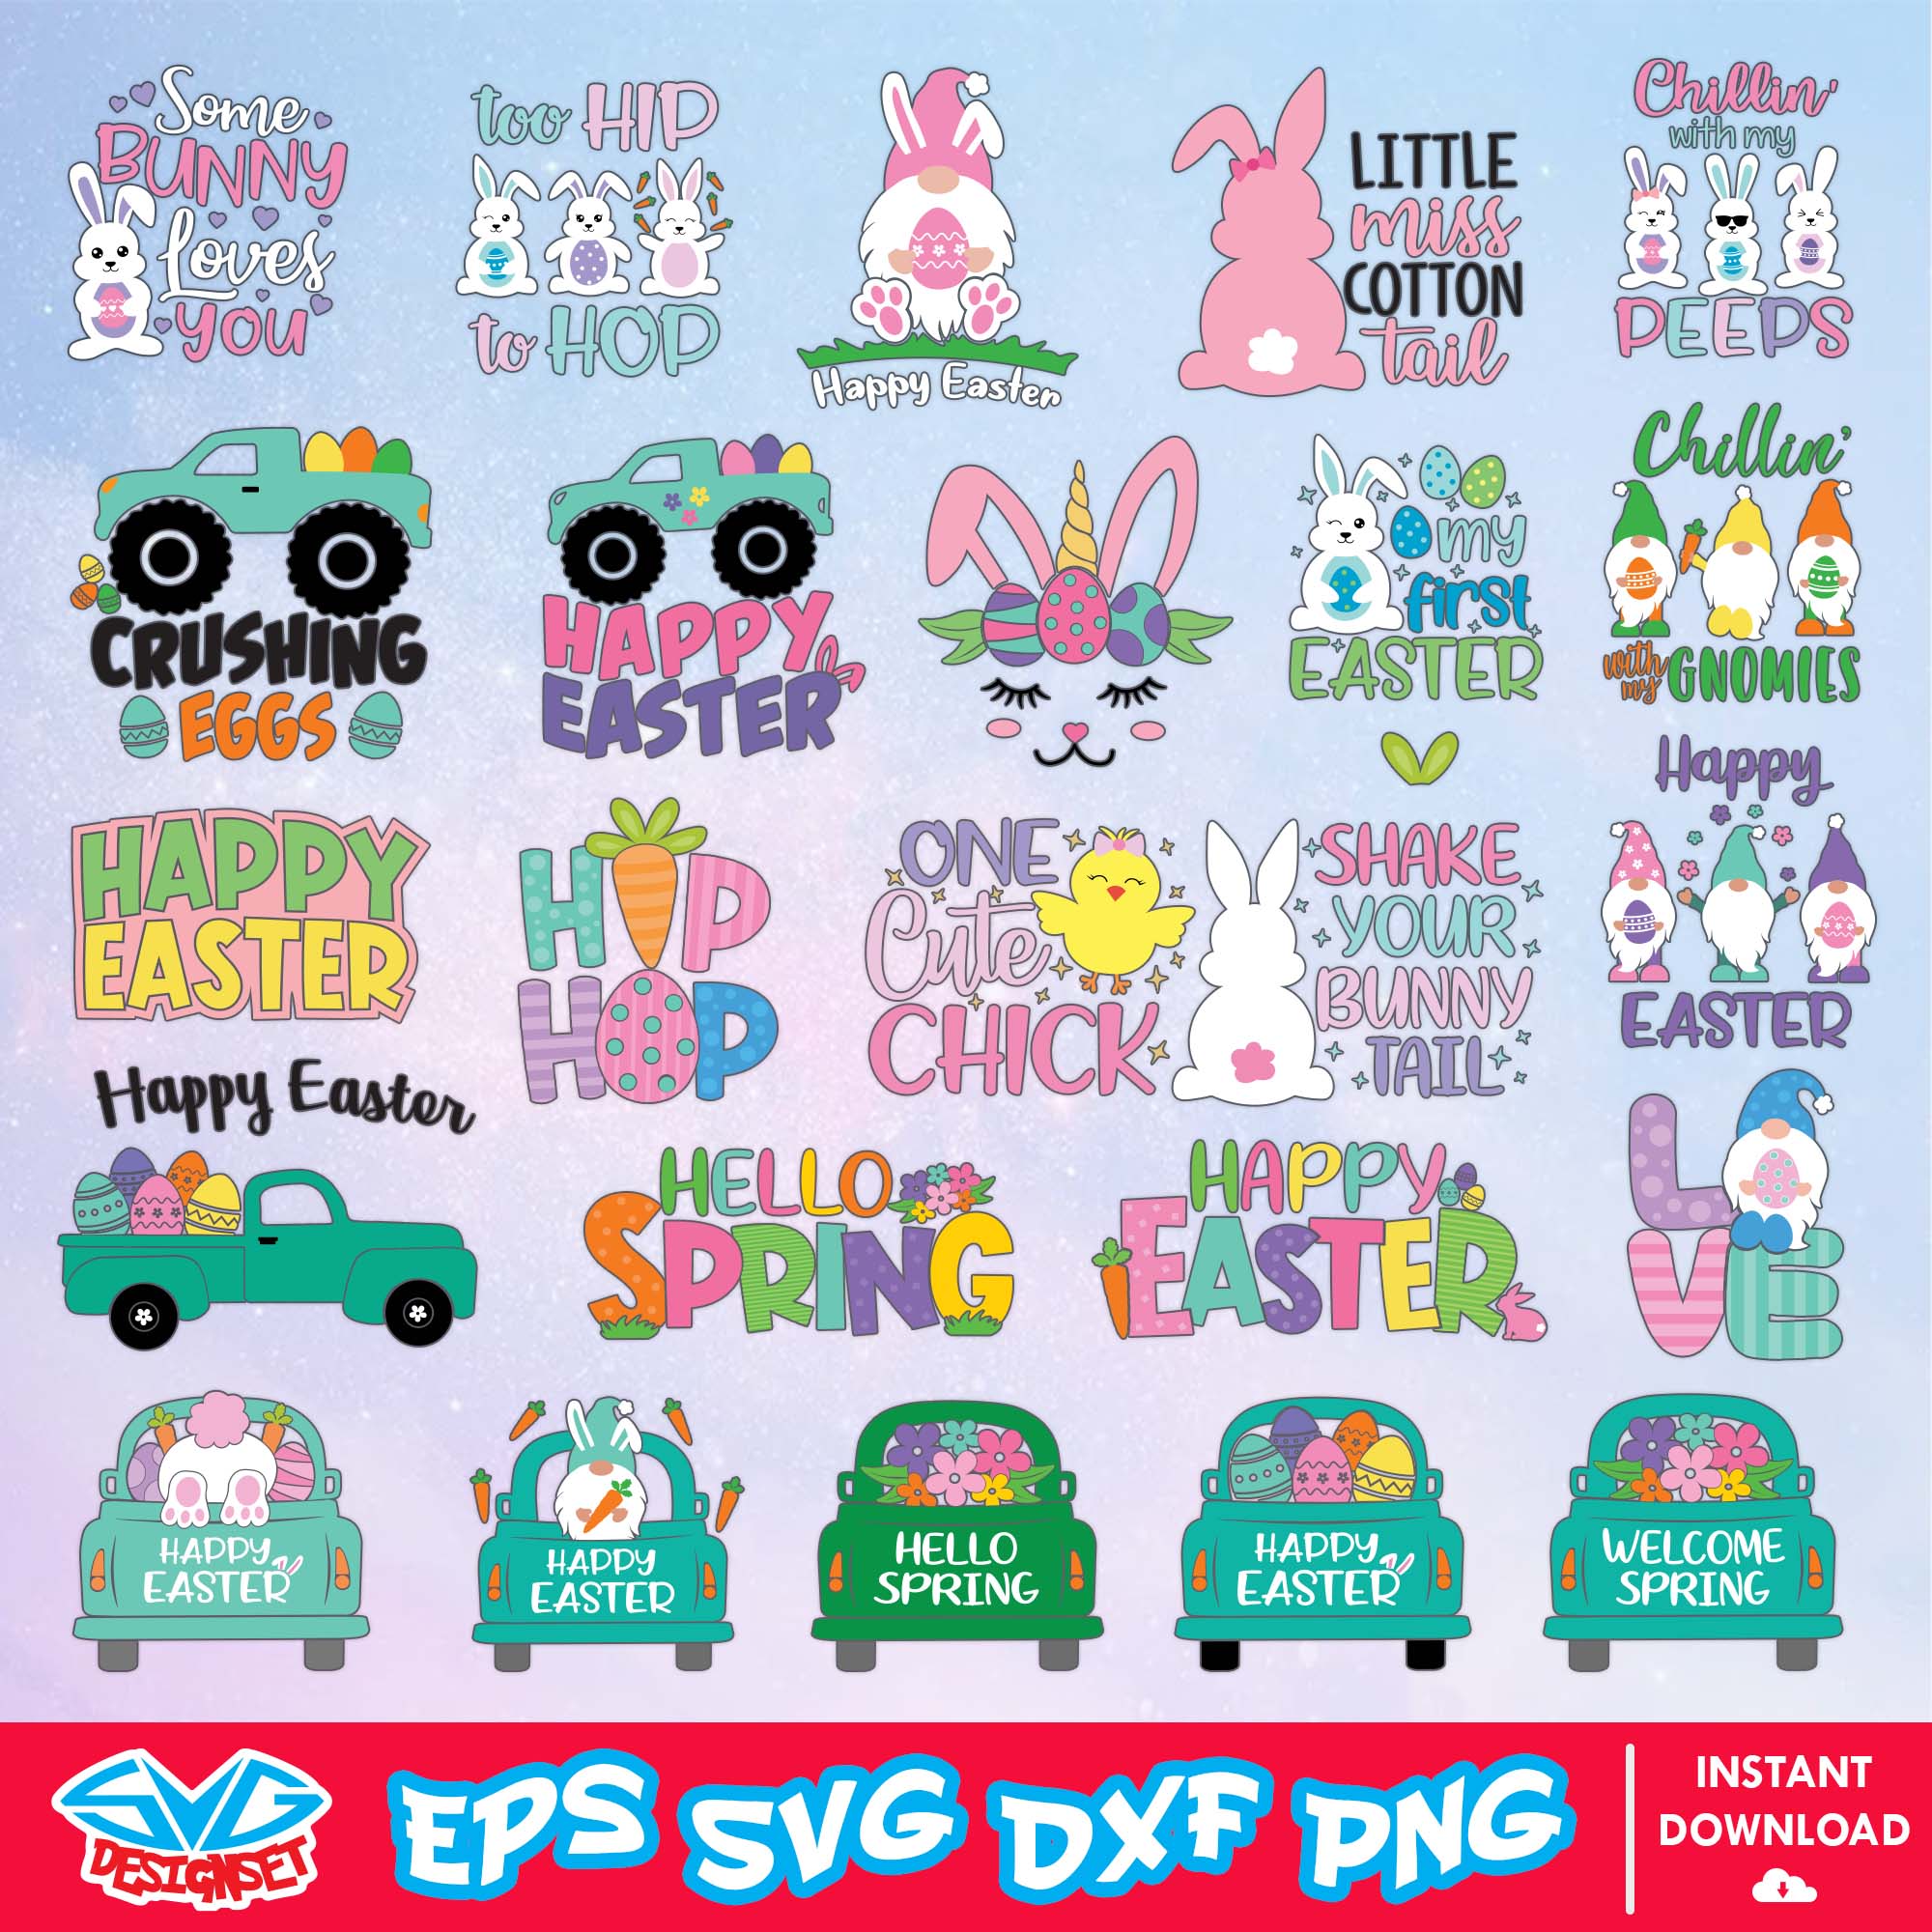 Easter Bundle Svg, Dxf, Eps, Png, Clipart, Silhouette, and Cut files for Cricut & Silhouette Cameo #1